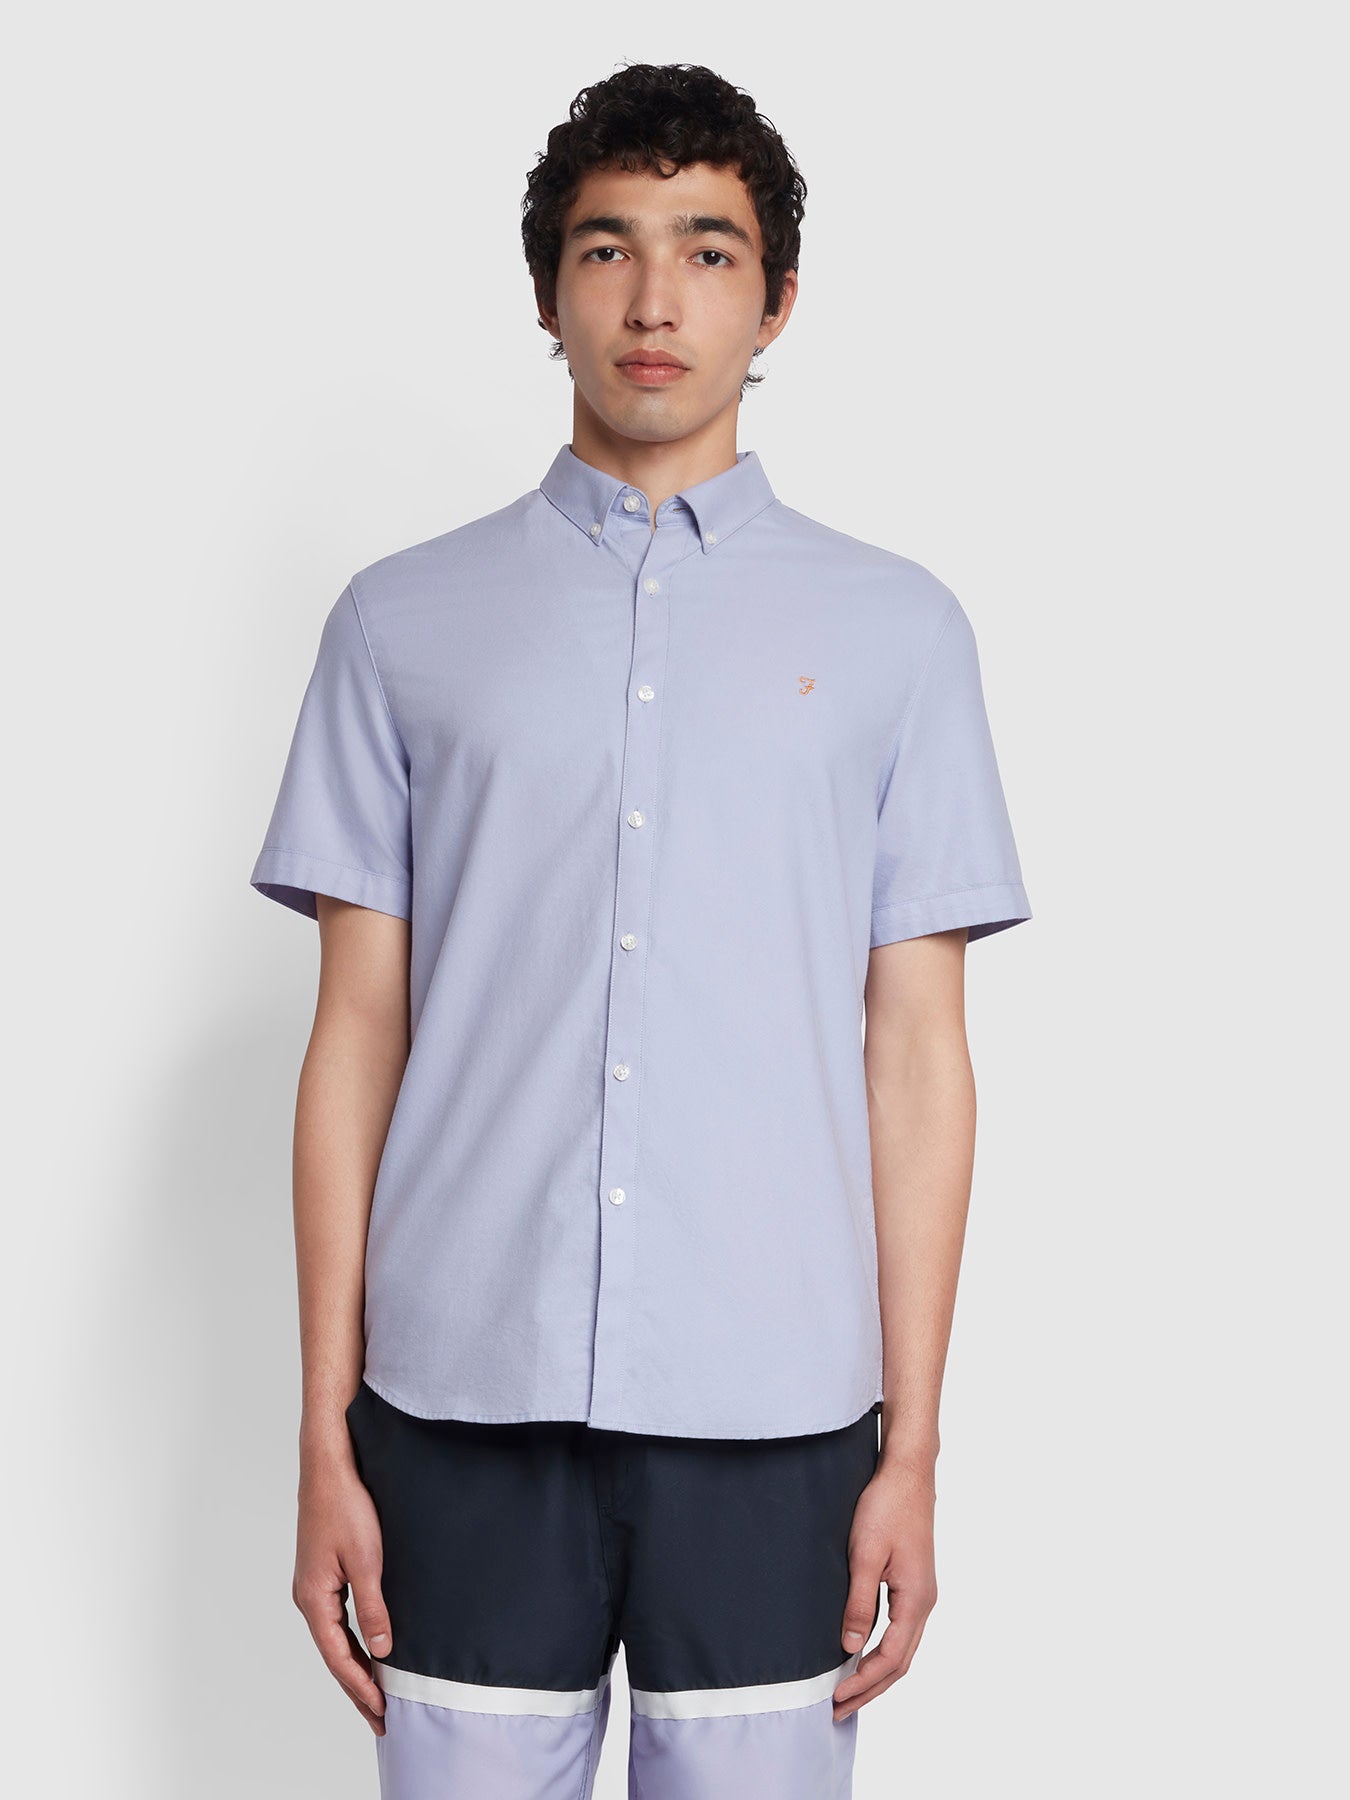 View Brewer Slim Fit Short Sleeve Organic Cotton Oxford Shirt In Dusty Lila information